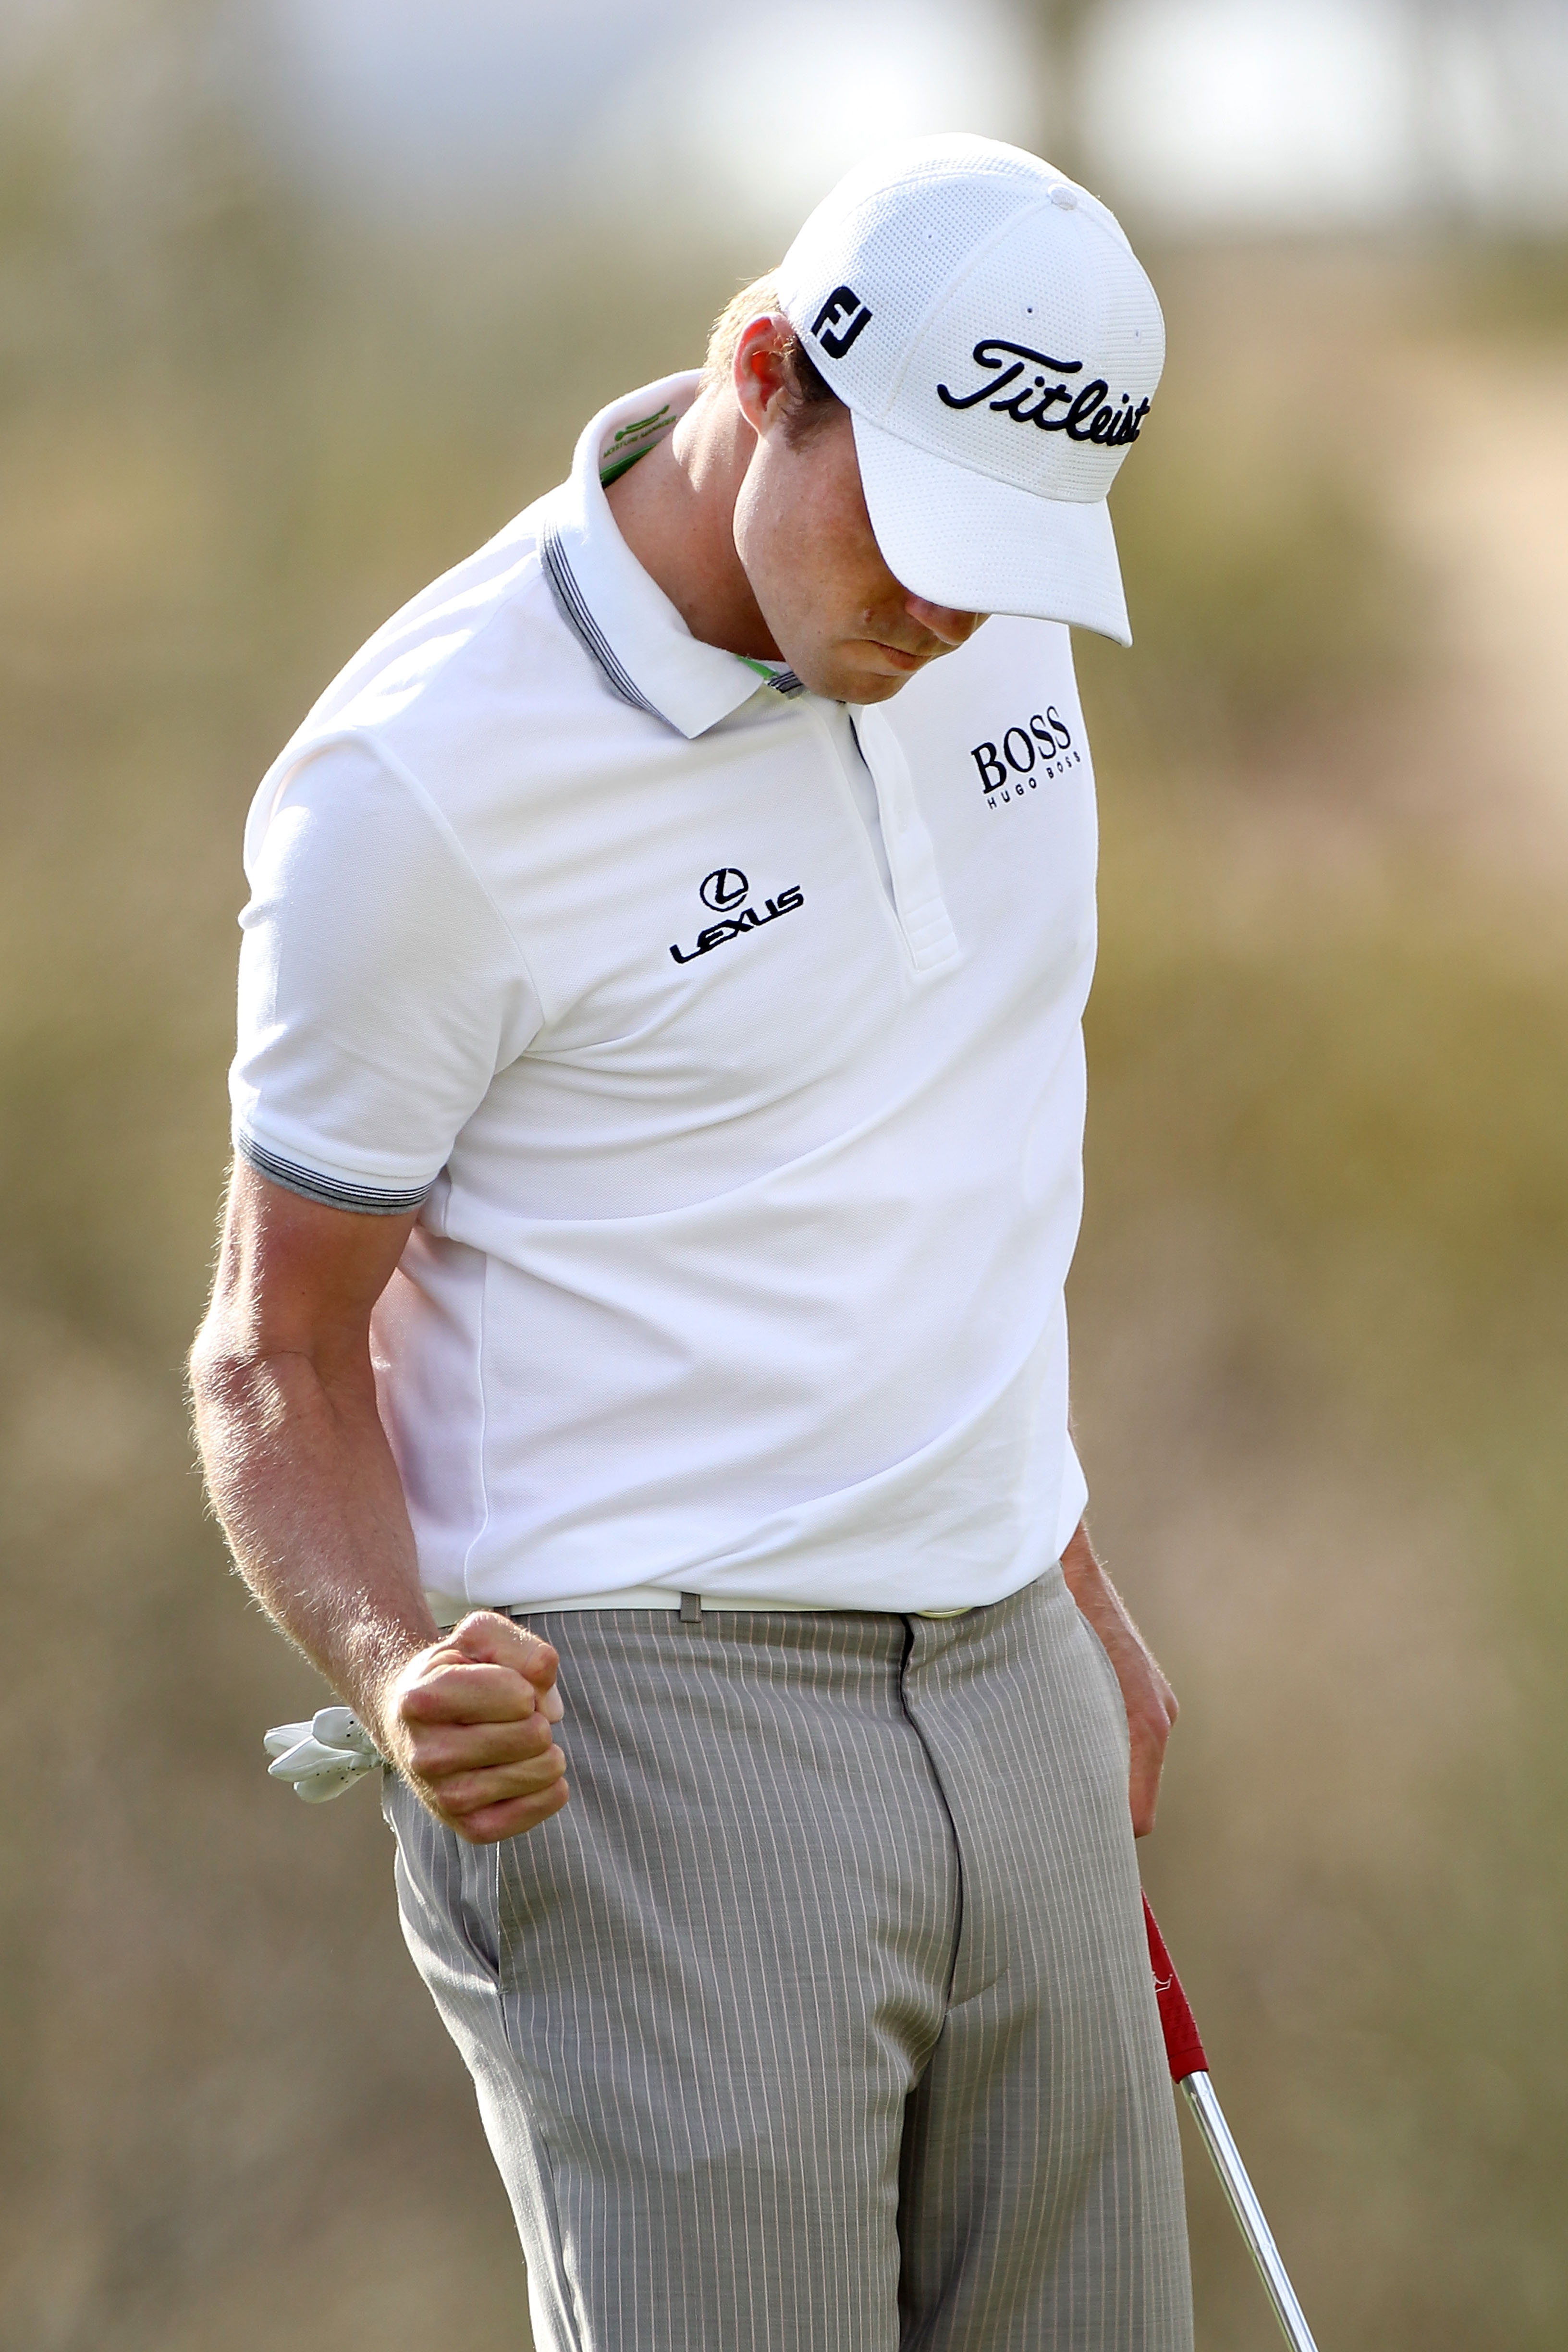 MARANA, AZ - FEBRUARY 25:  Nick Watney reacts on the 18th hole during the third round of the Accenture Match Play Championship at the Ritz-Carlton Golf Club on February 25, 2011 in Marana, Arizona.  (Photo by Sam Greenwood/Getty Images)